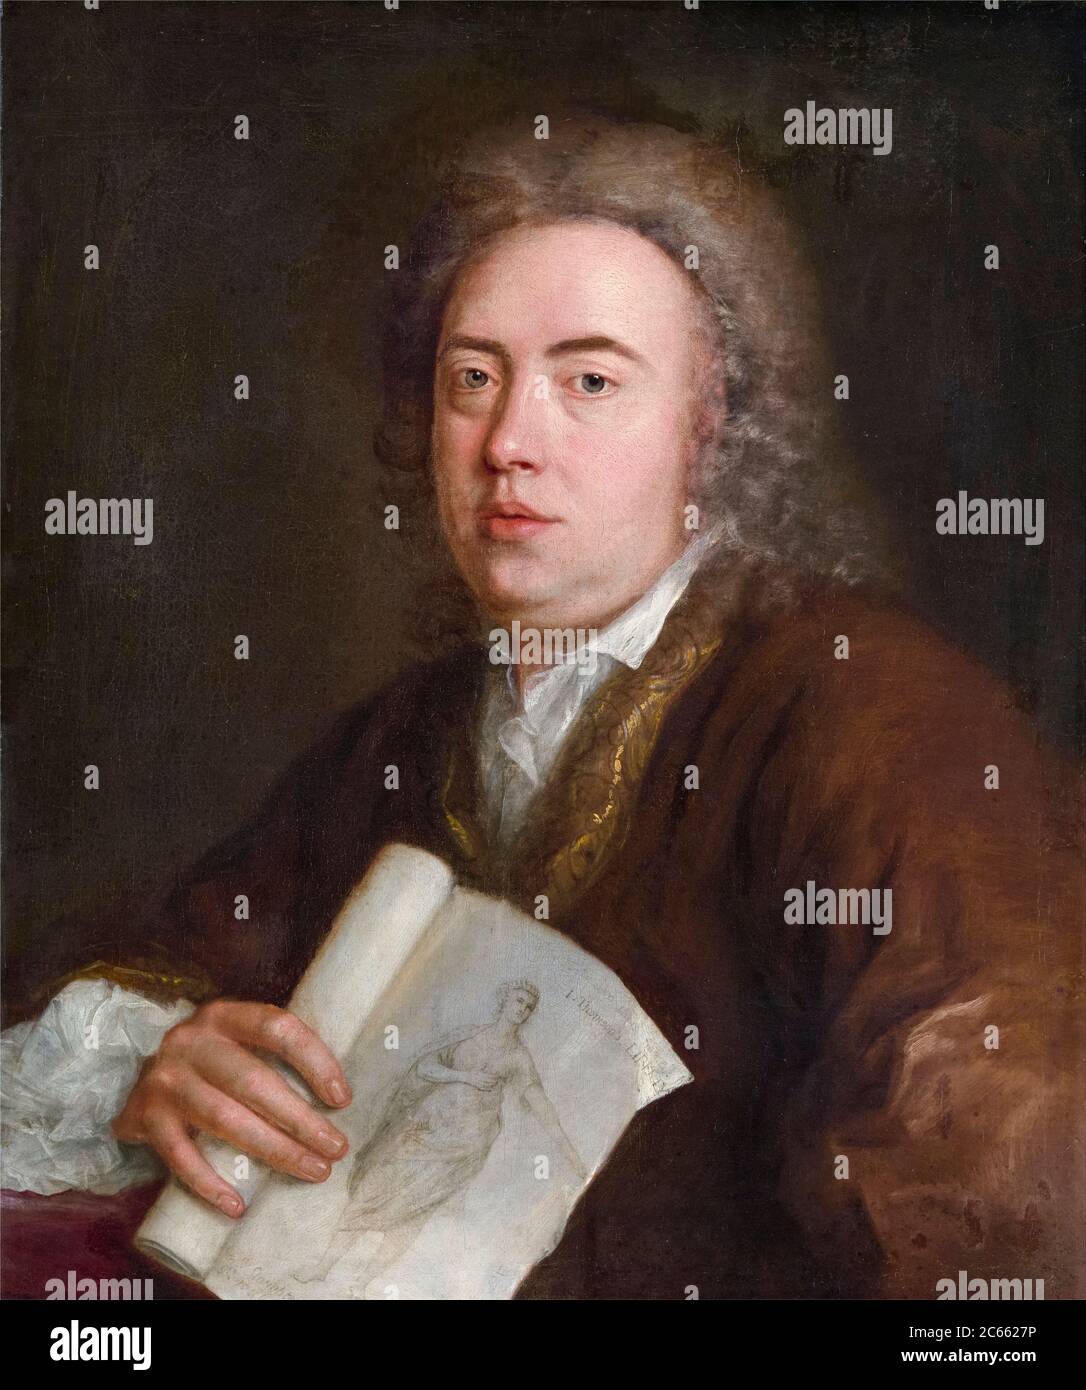 James Thomson (1700-1748), Scottish poet and playwright, portrait painting by Stephen Slaughter, 1736 Stock Photo